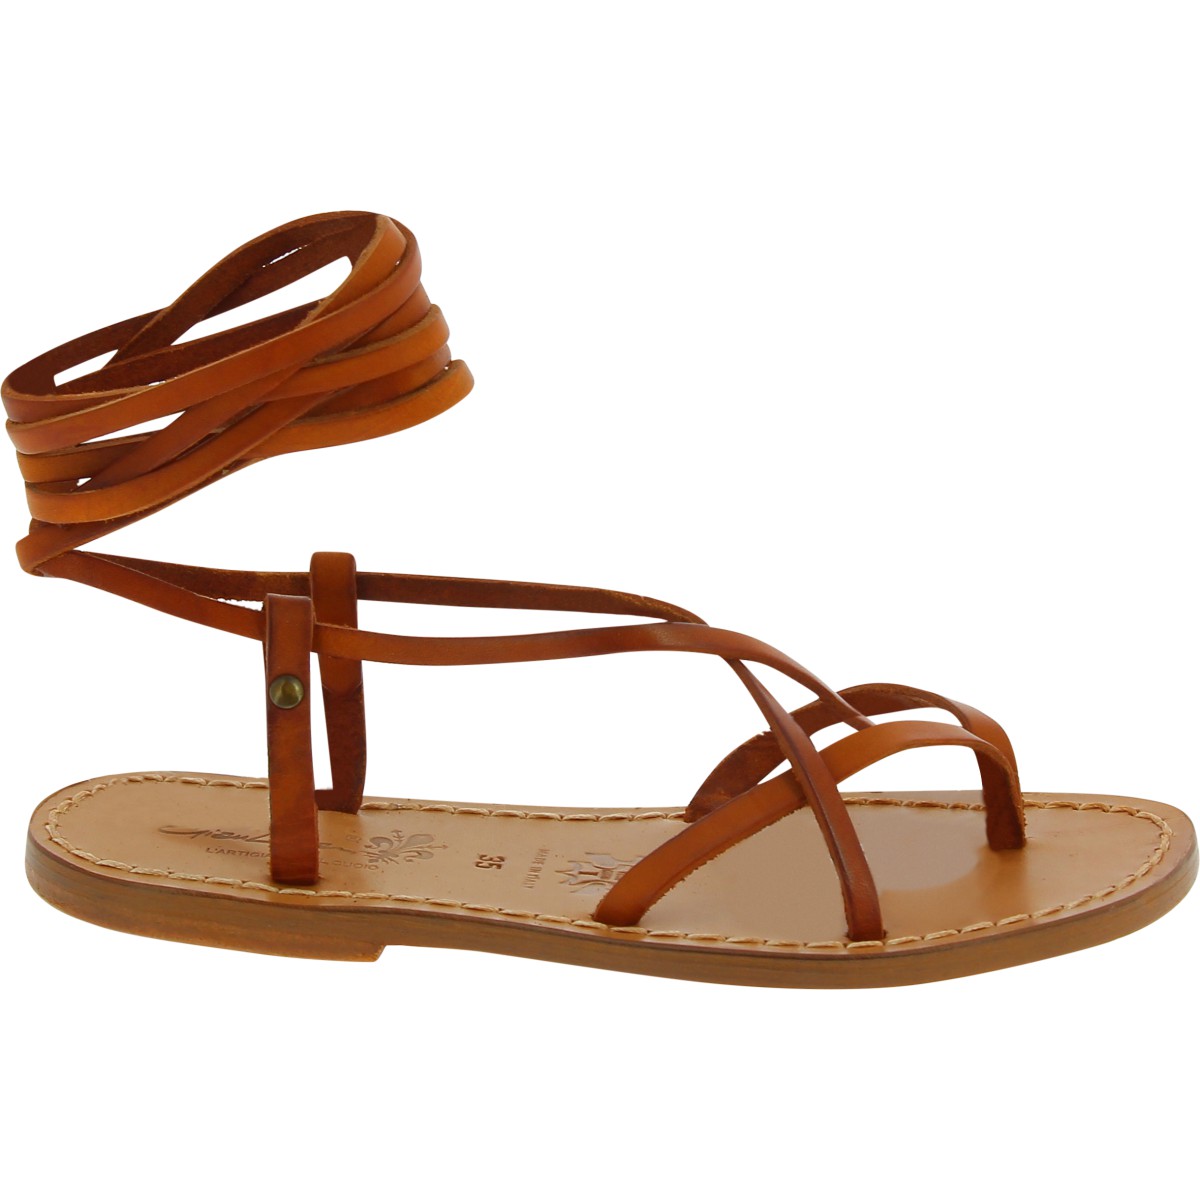 Share more than 150 brown lace up sandals - awesomeenglish.edu.vn